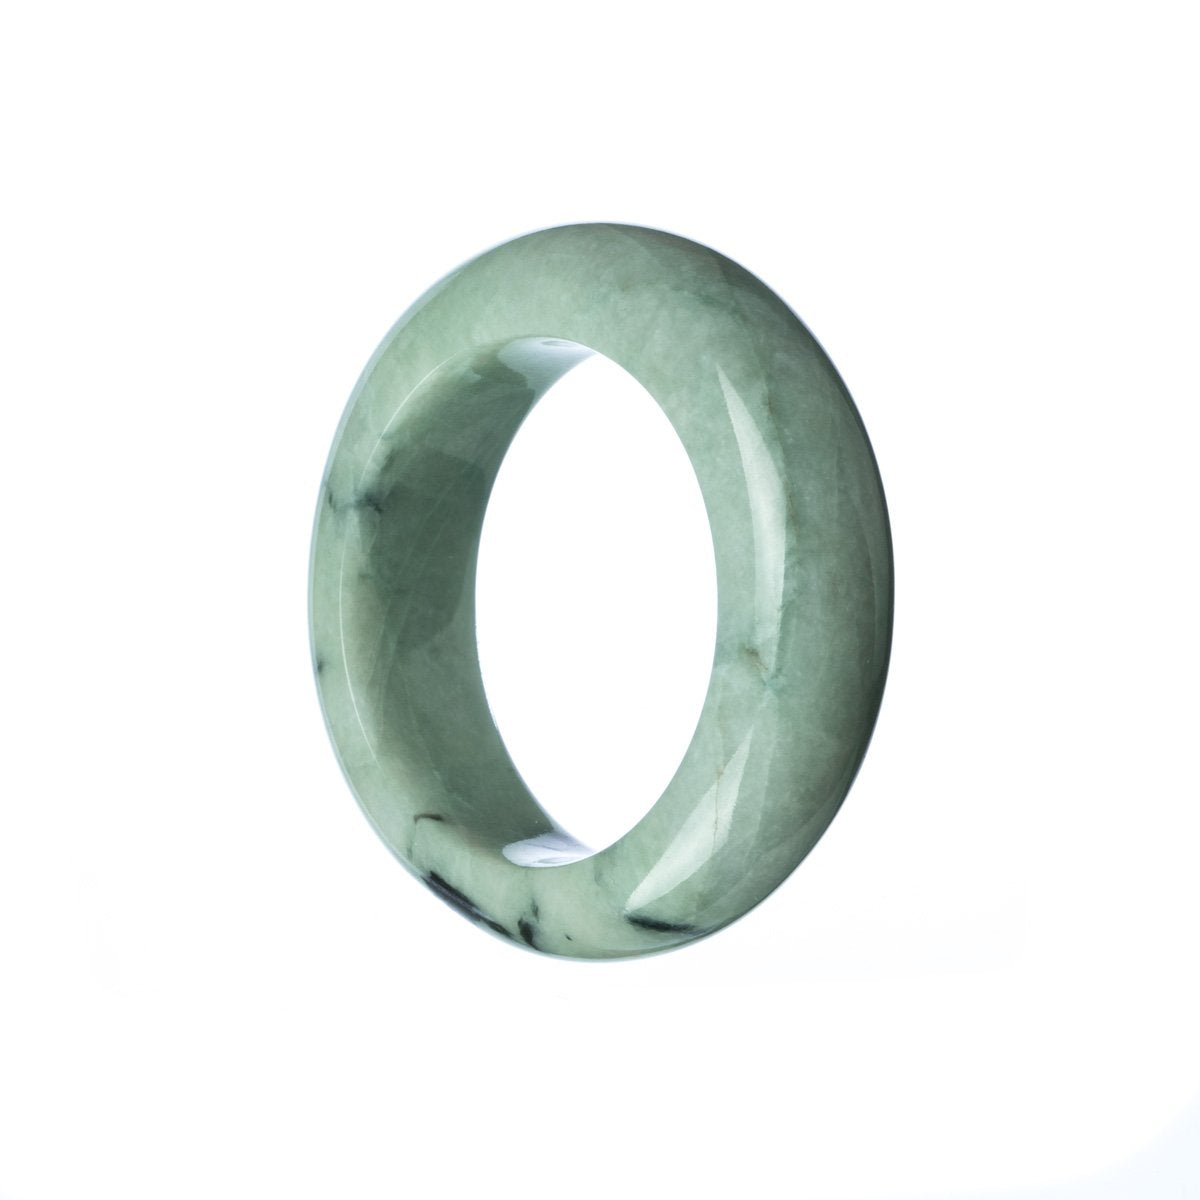 A small, semi-round green jade bangle designed for children, crafted from genuine Type A jade. Perfect for adding a touch of elegance to any outfit.